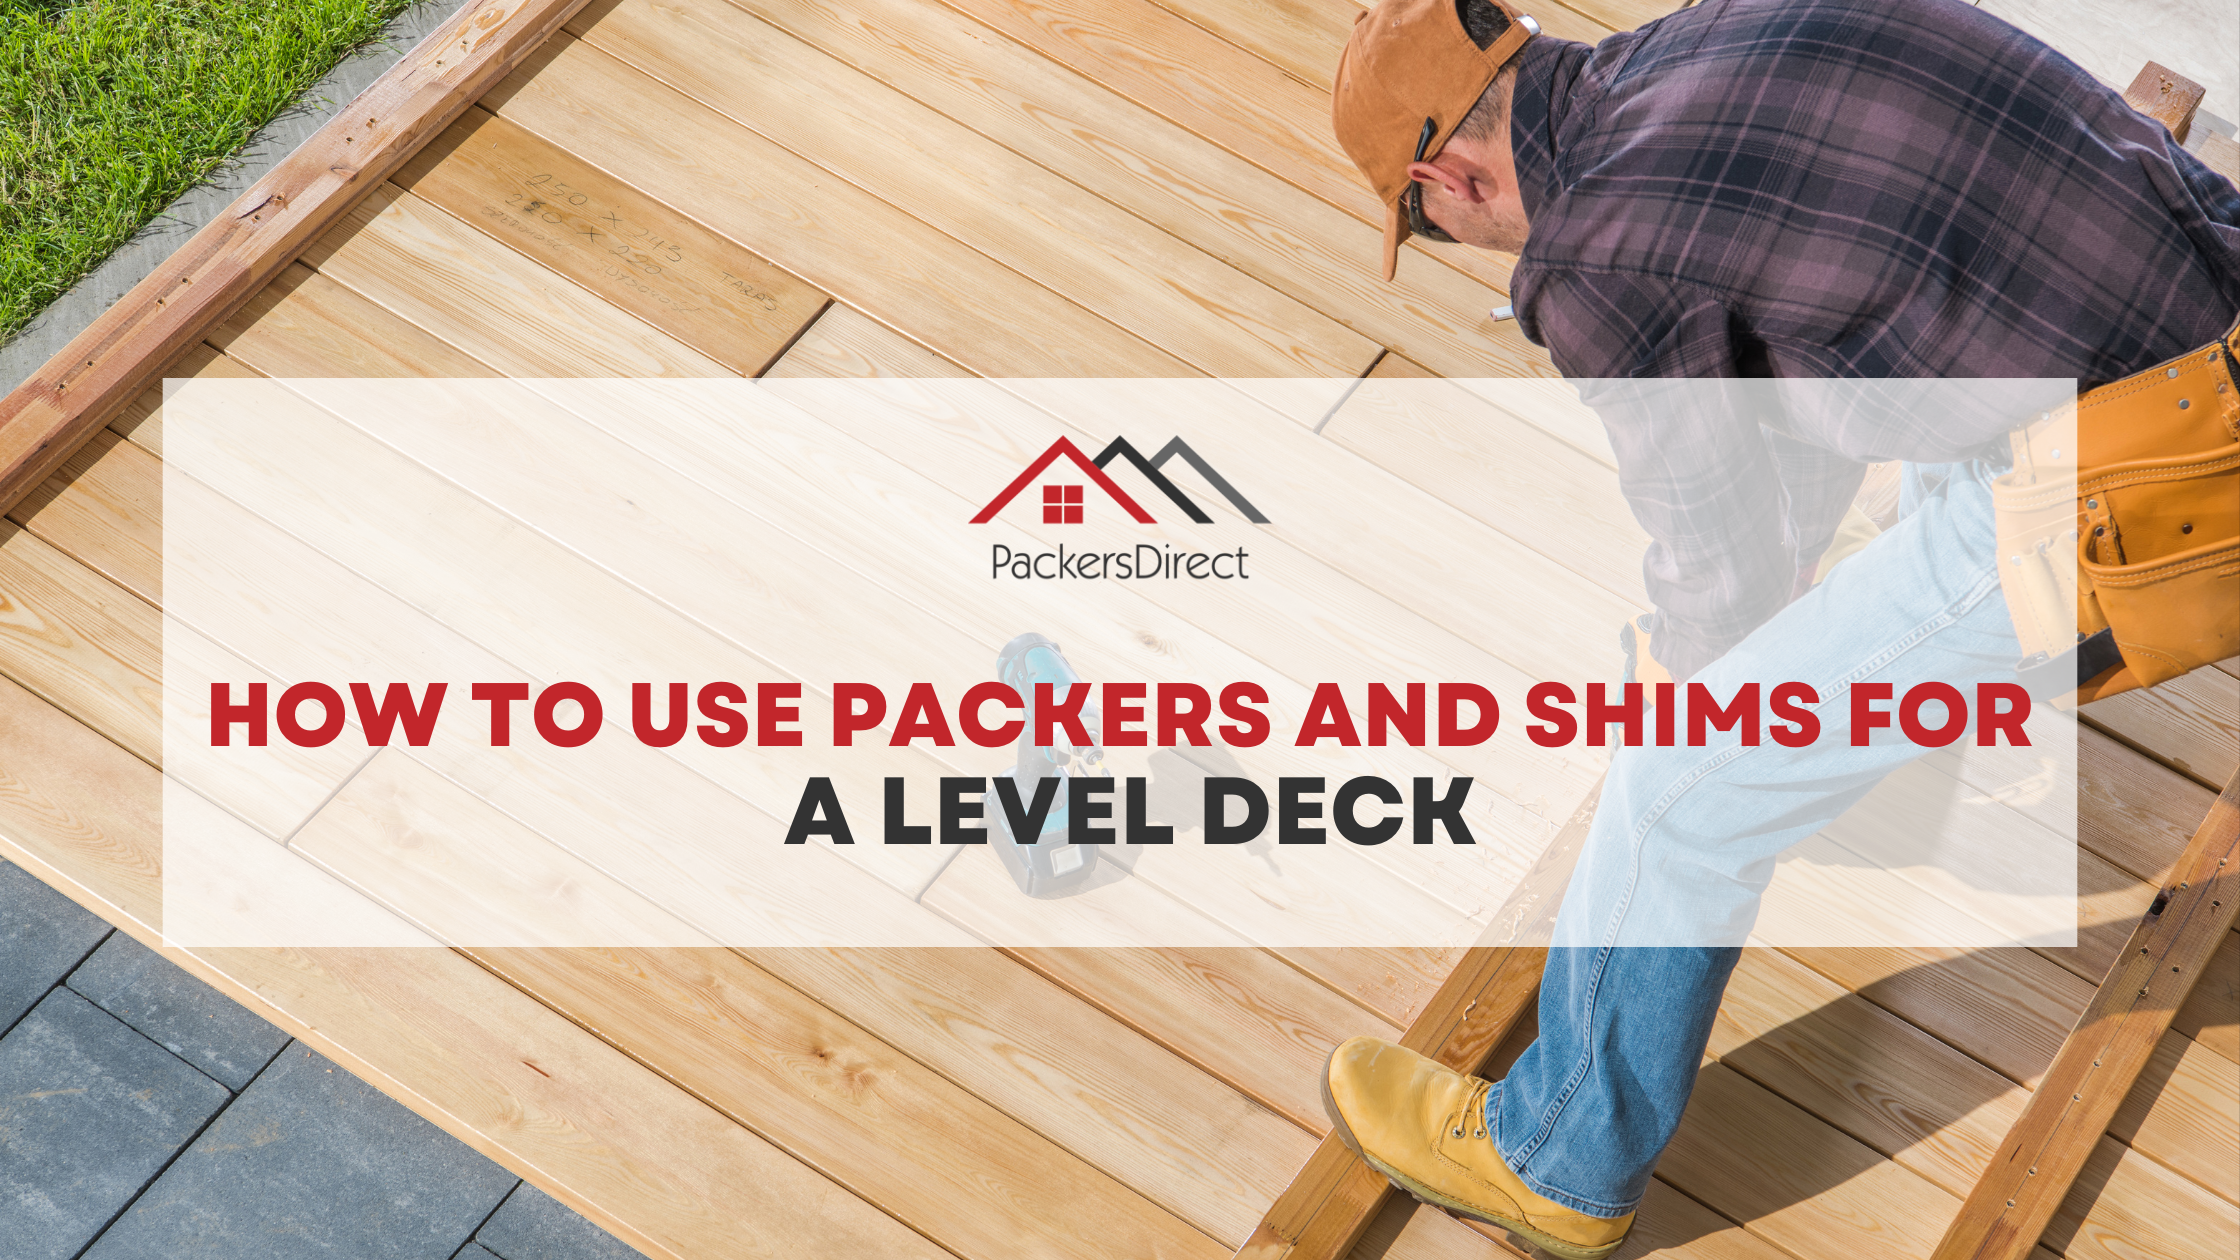 How to Use Packers and Shims for a Level Deck